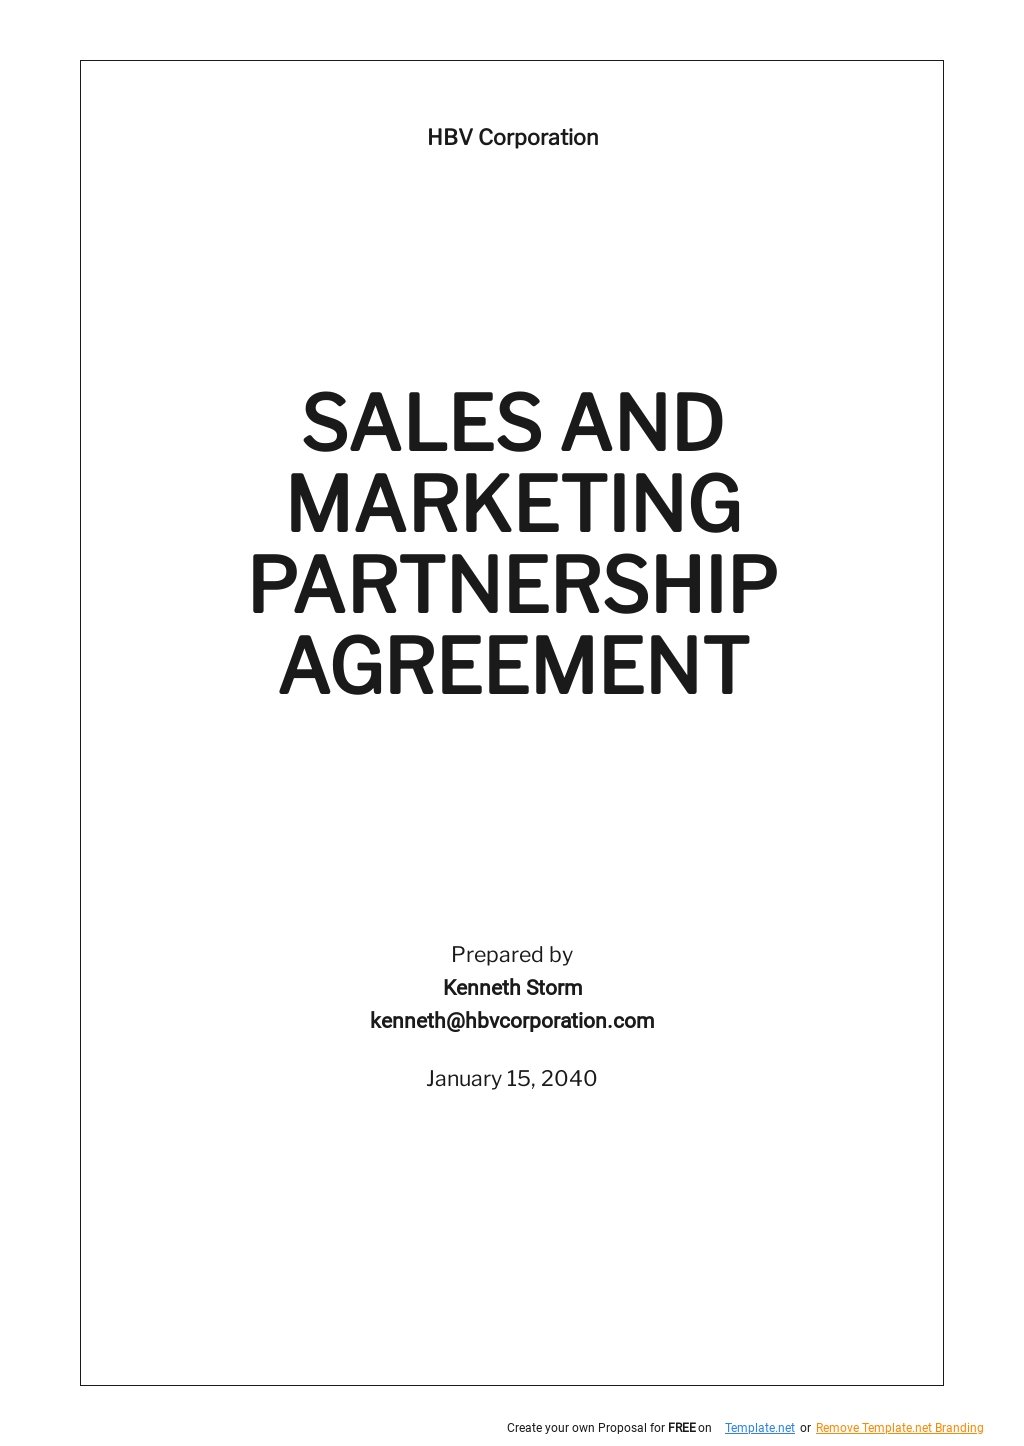 Sales and Marketing Partnership Agreement Template in Word, Google Docs, Apple Pages